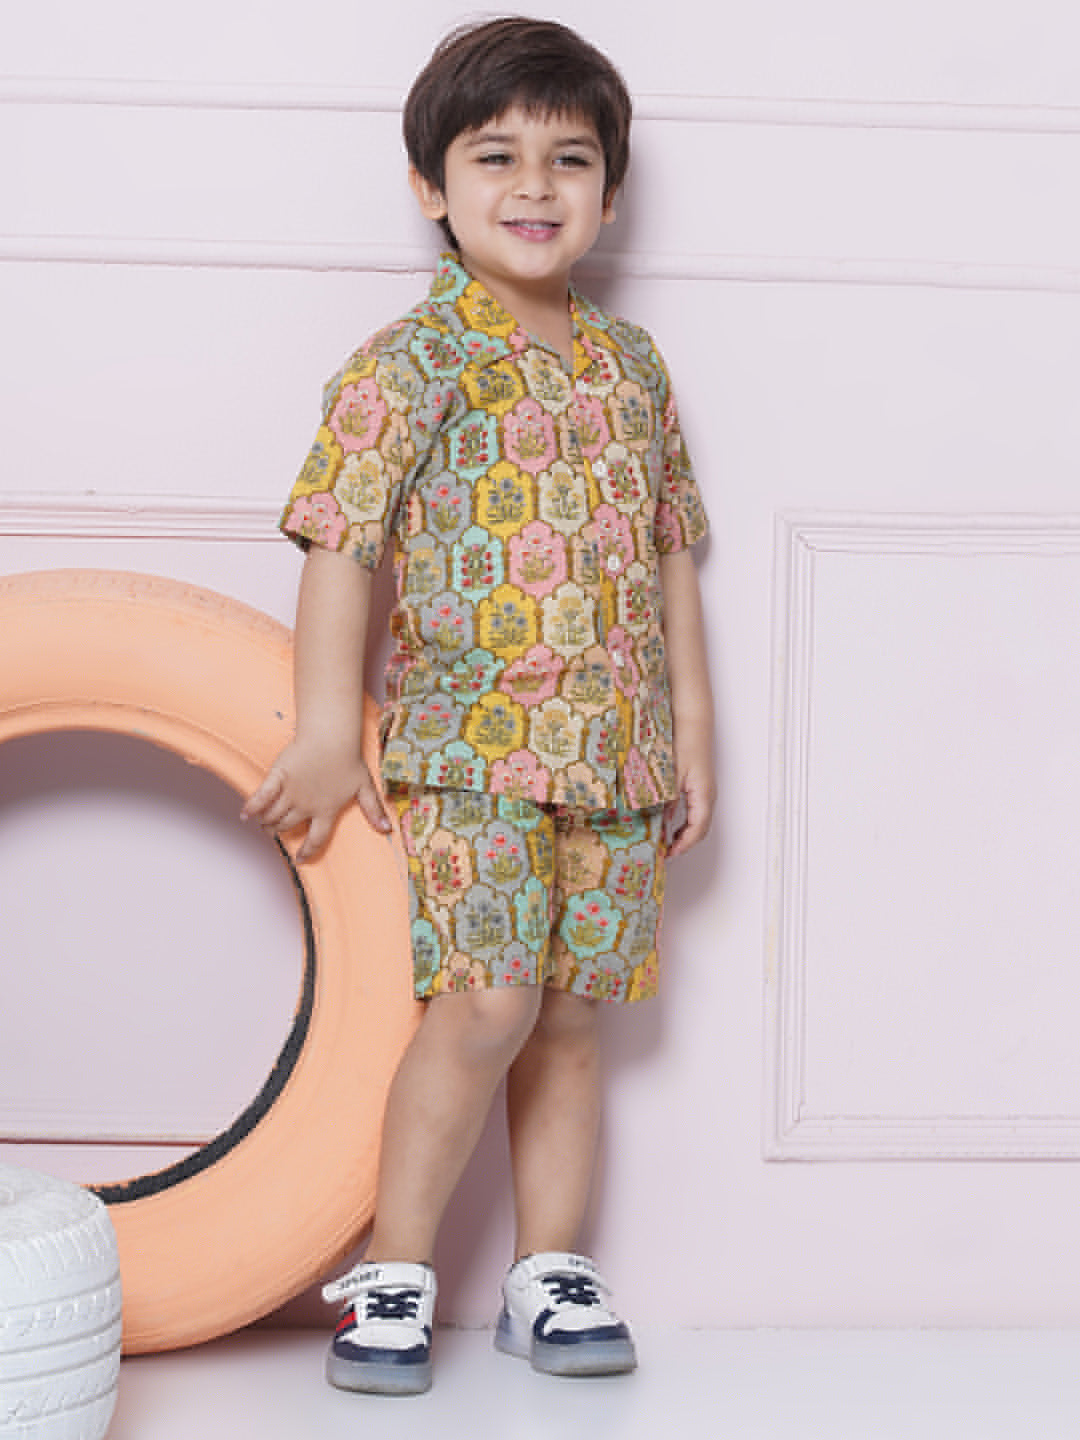 Beige Cotton Shirt & shorts Half Sleeves with Collar and Floral CO-ORDS Set for Boys